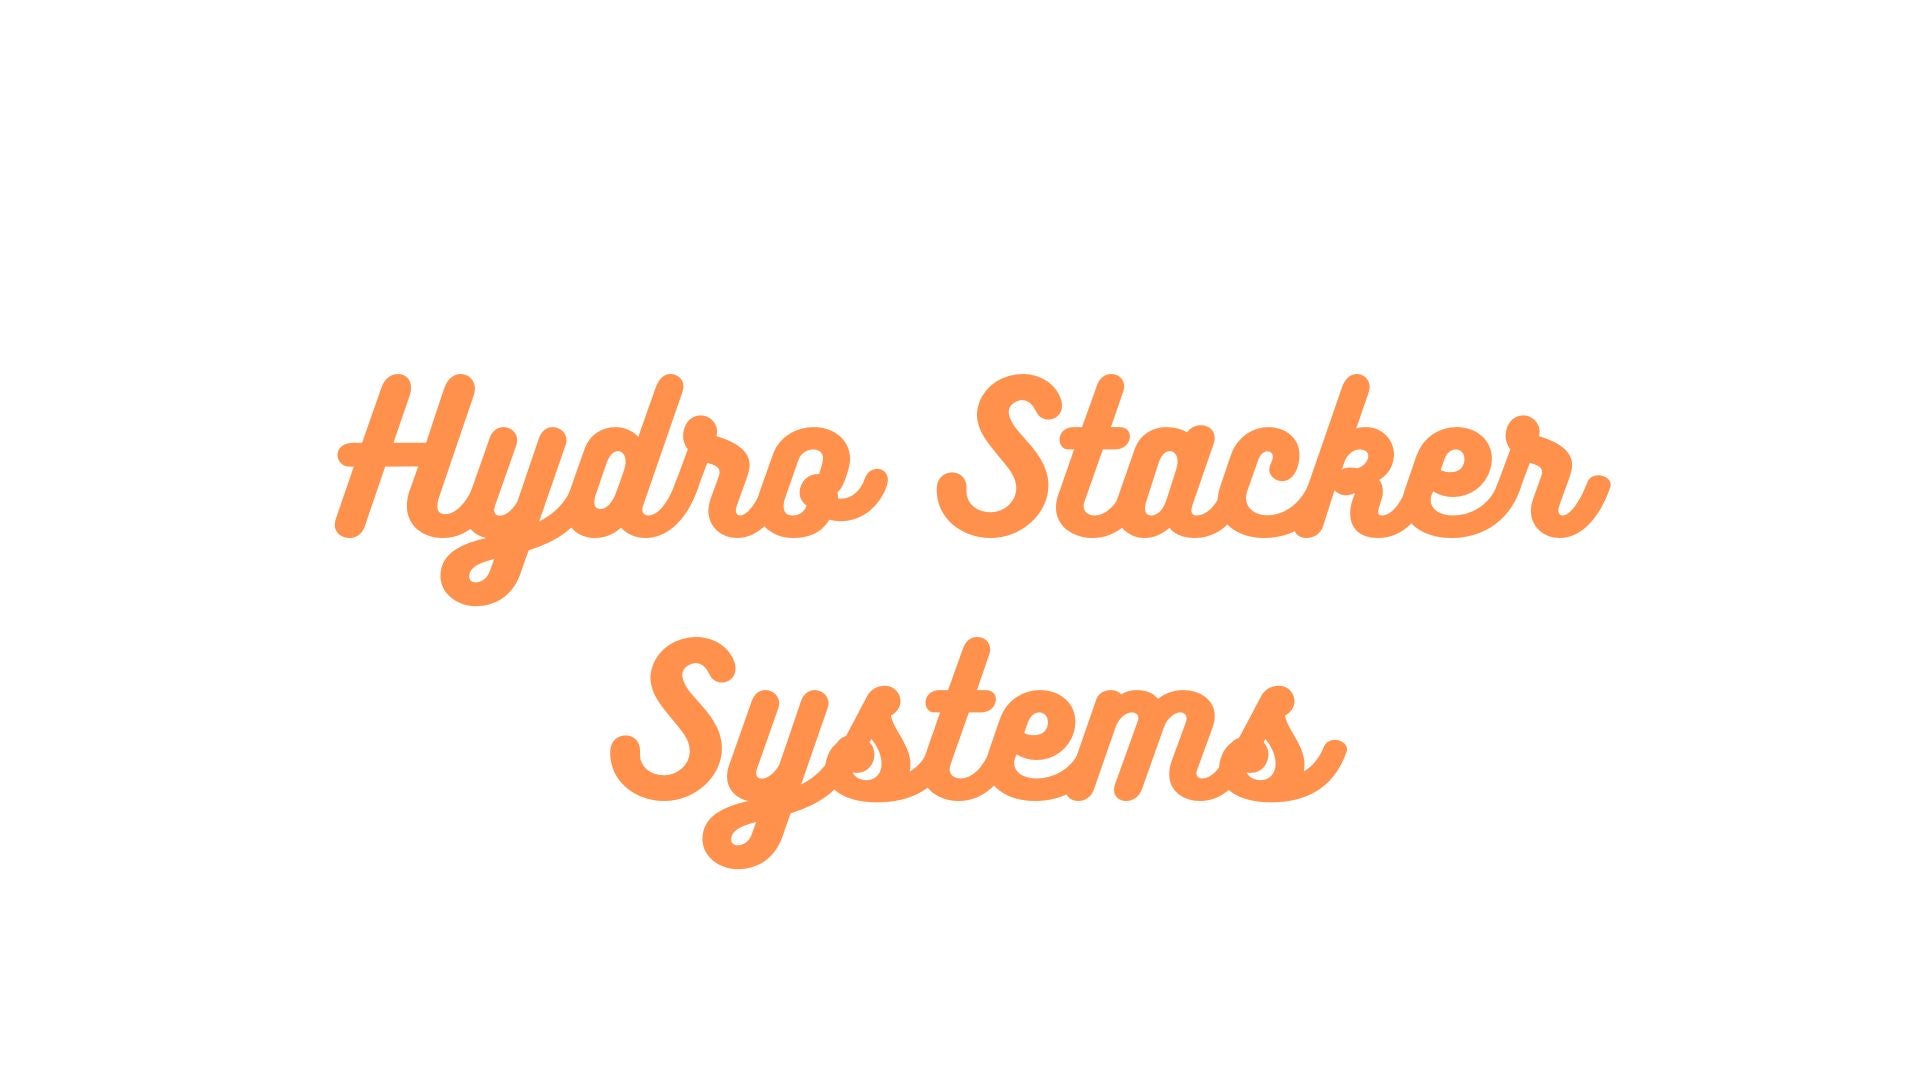 Hydro Stacker Systems